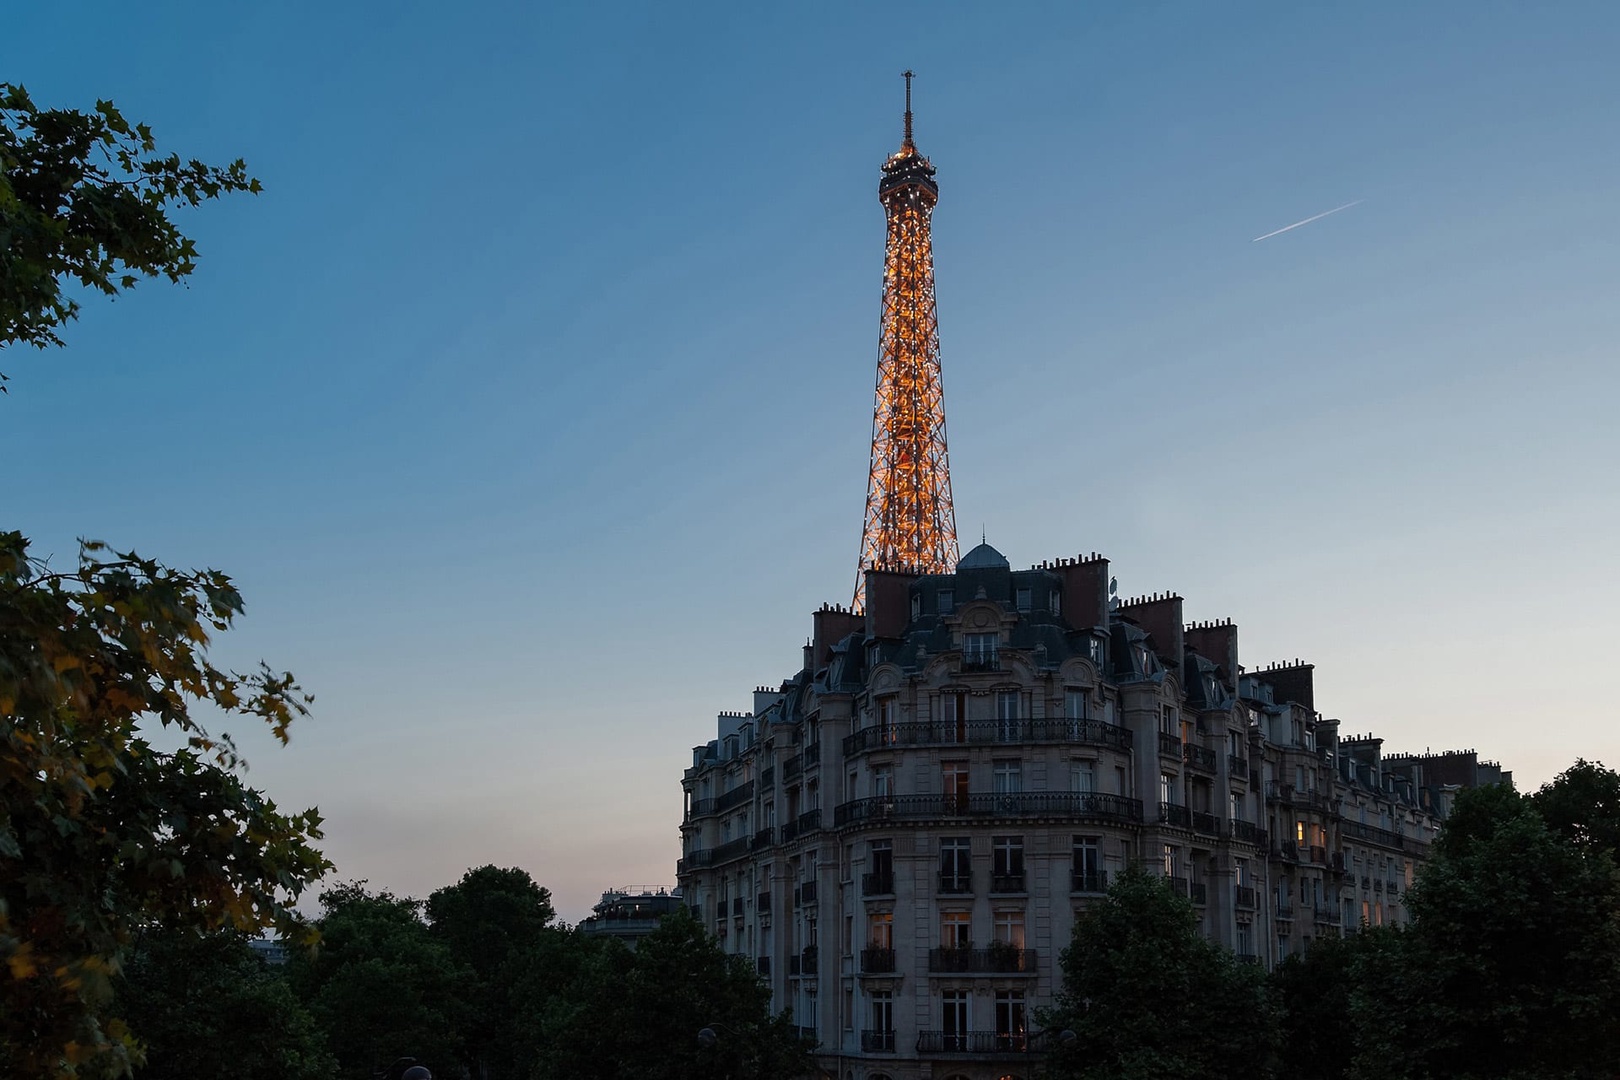 Eiffel Tower views like these provide memories of a lifetime.